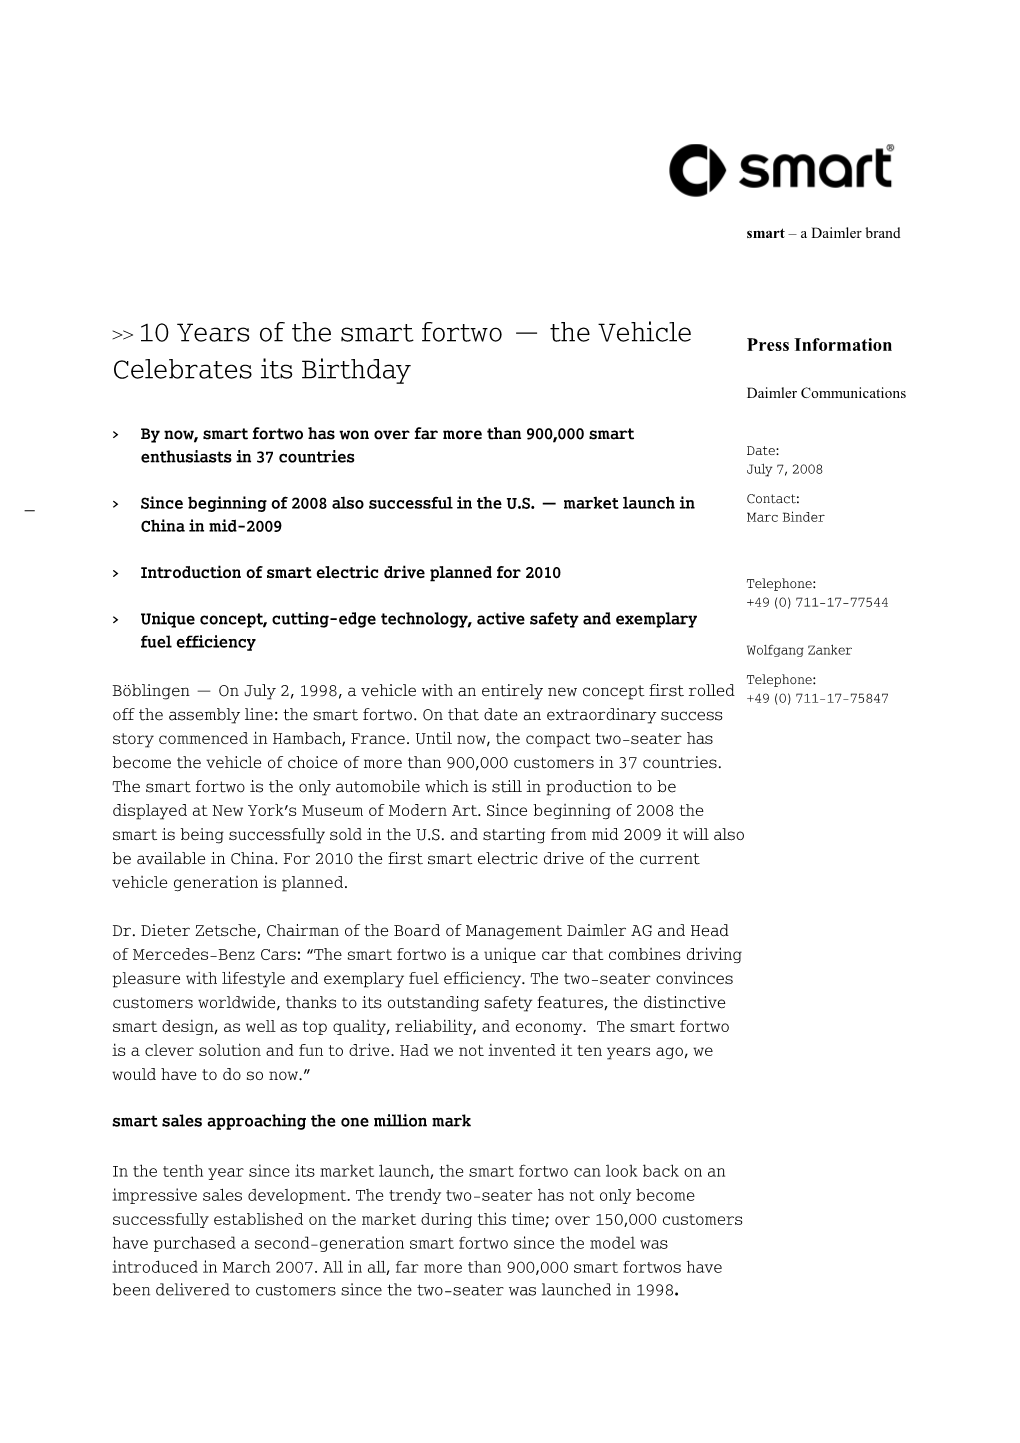 10 Years of the Smart Fortwo — the Vehicle Press Information Celebrates Its Birthday Daimler Communications